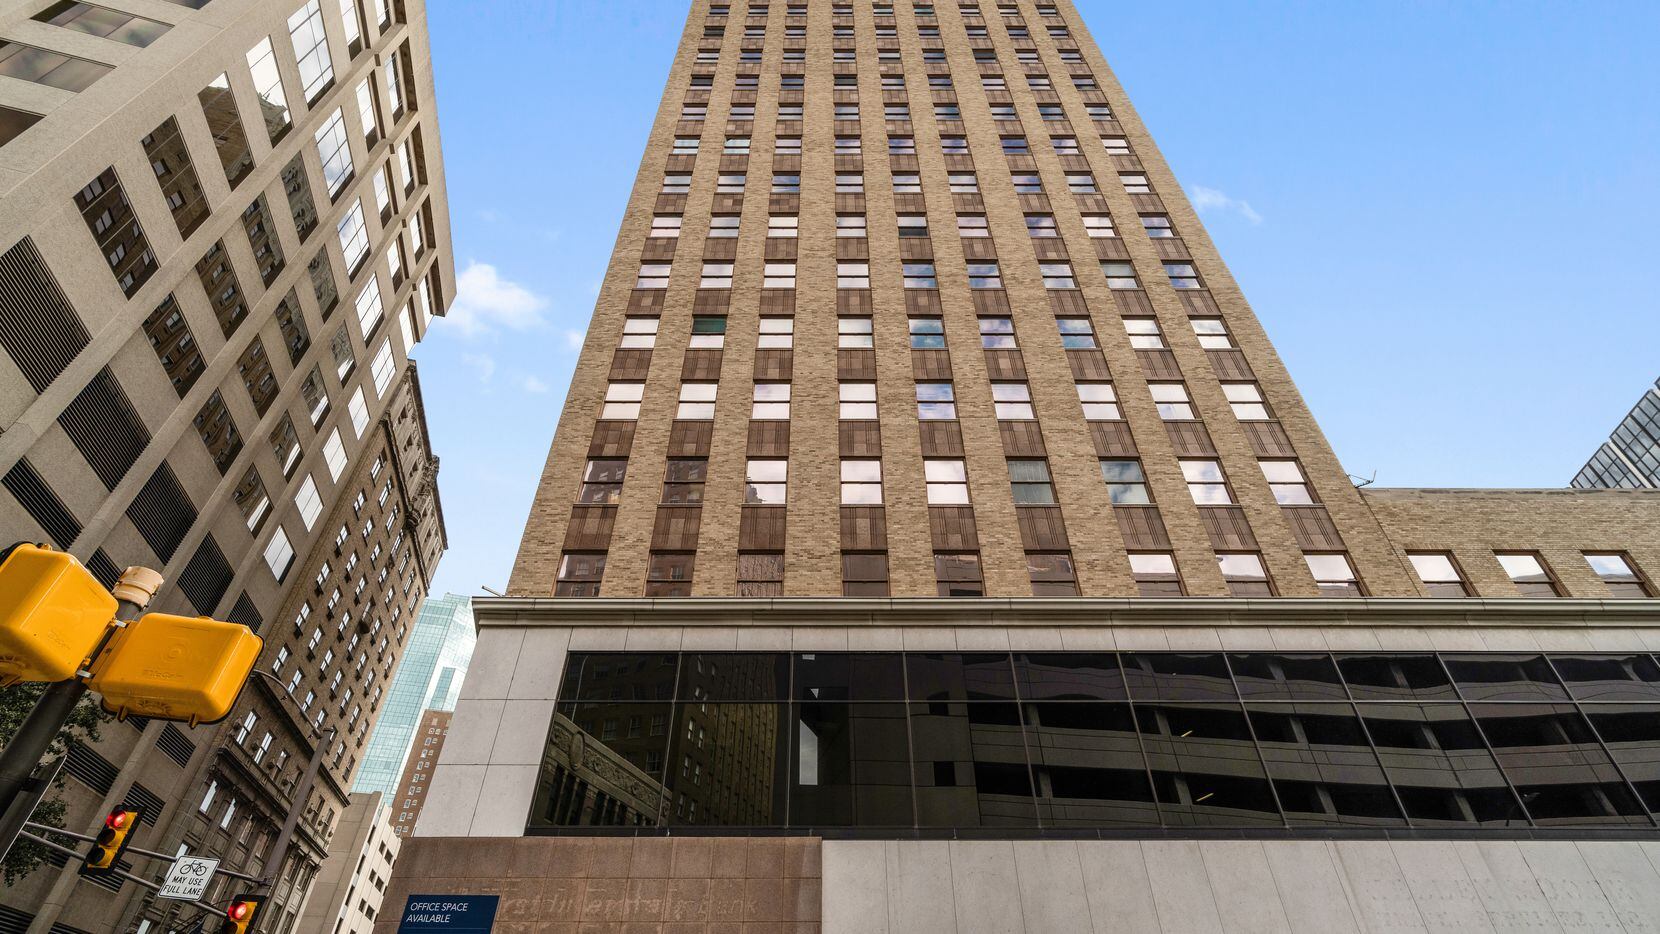 The 16-story Oil & Gas Building was built in downtown Fort Worth in 1954.